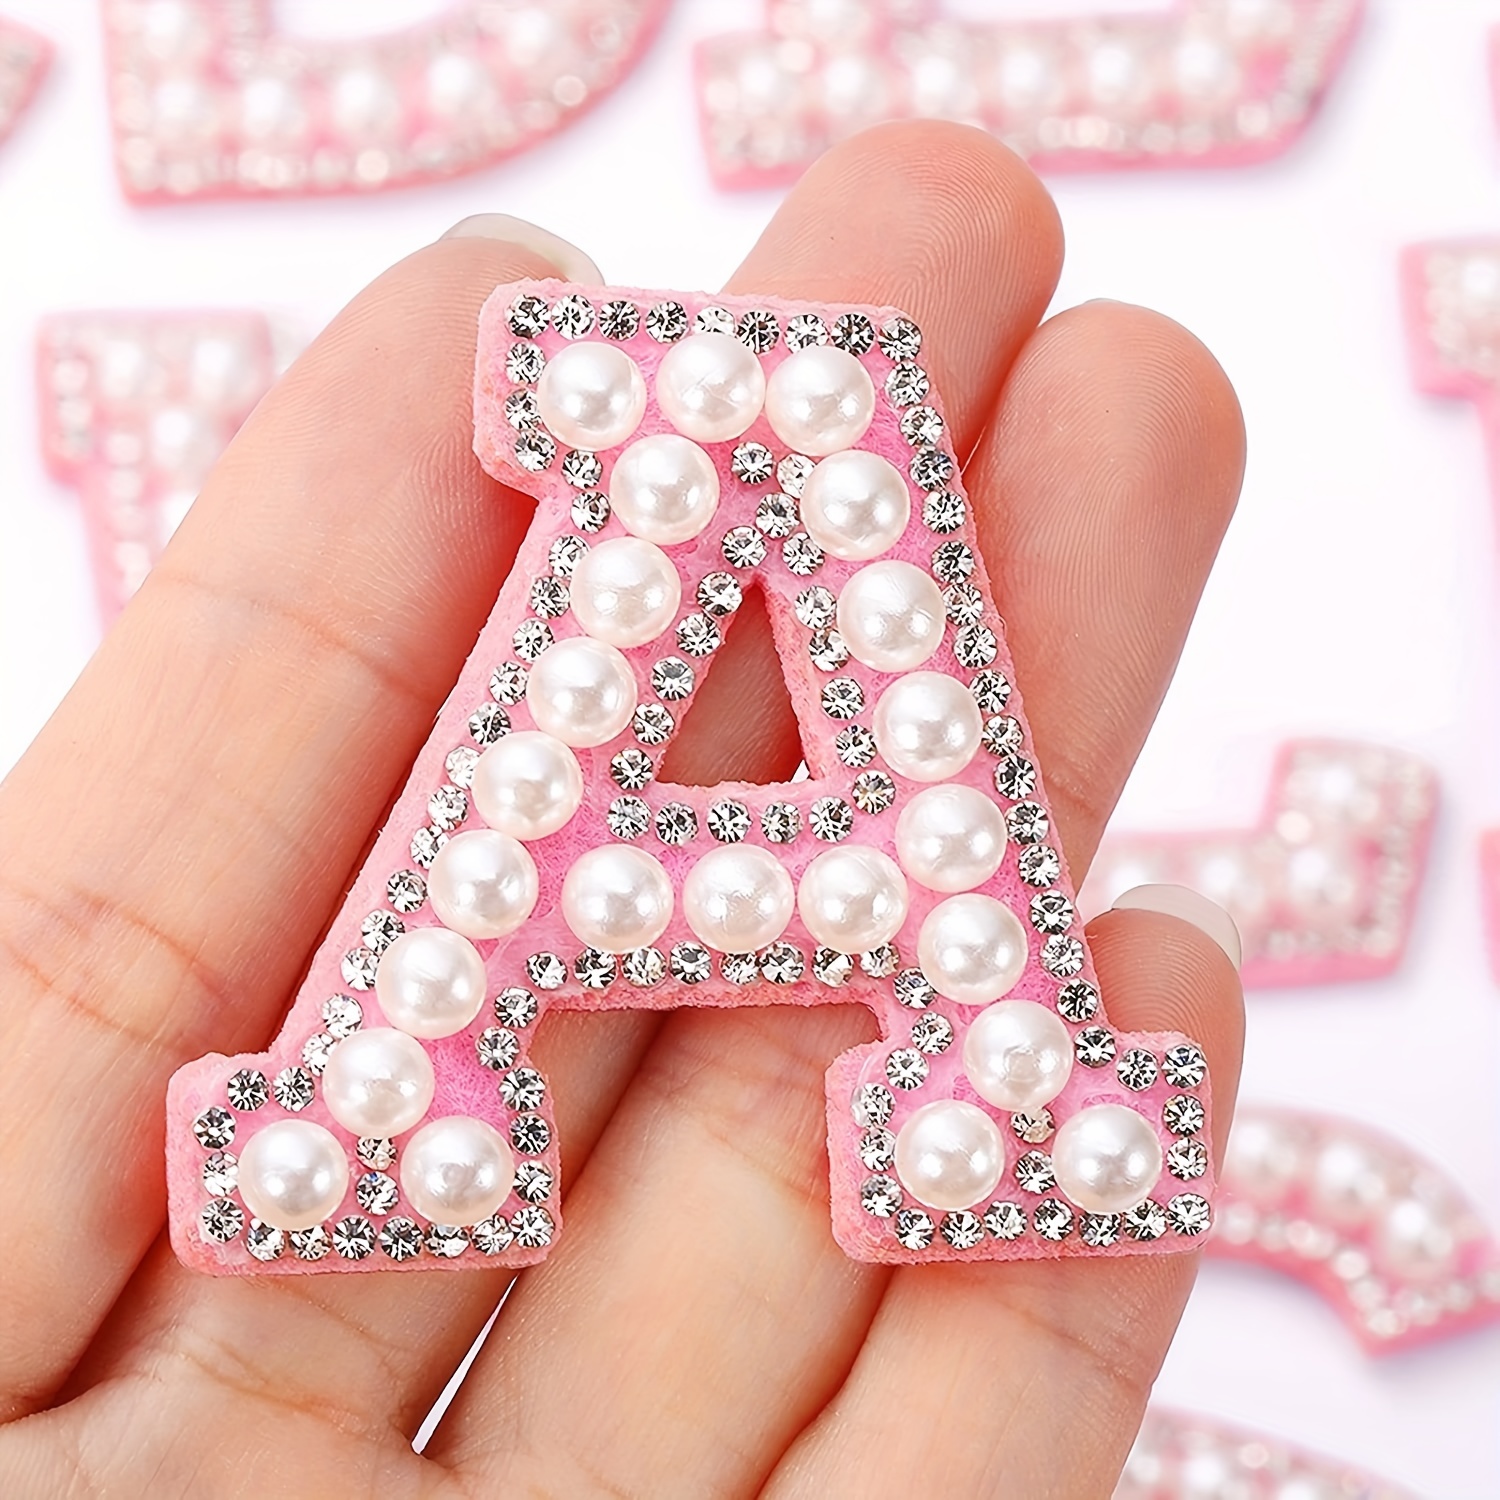  2 PCS Self Adhesive Letter Patches For DIY Supplies, Pearl  Iron On Letters For Fabric Clothing/Hat/Bag, A-Z Varsity Letters Iron On  Patches